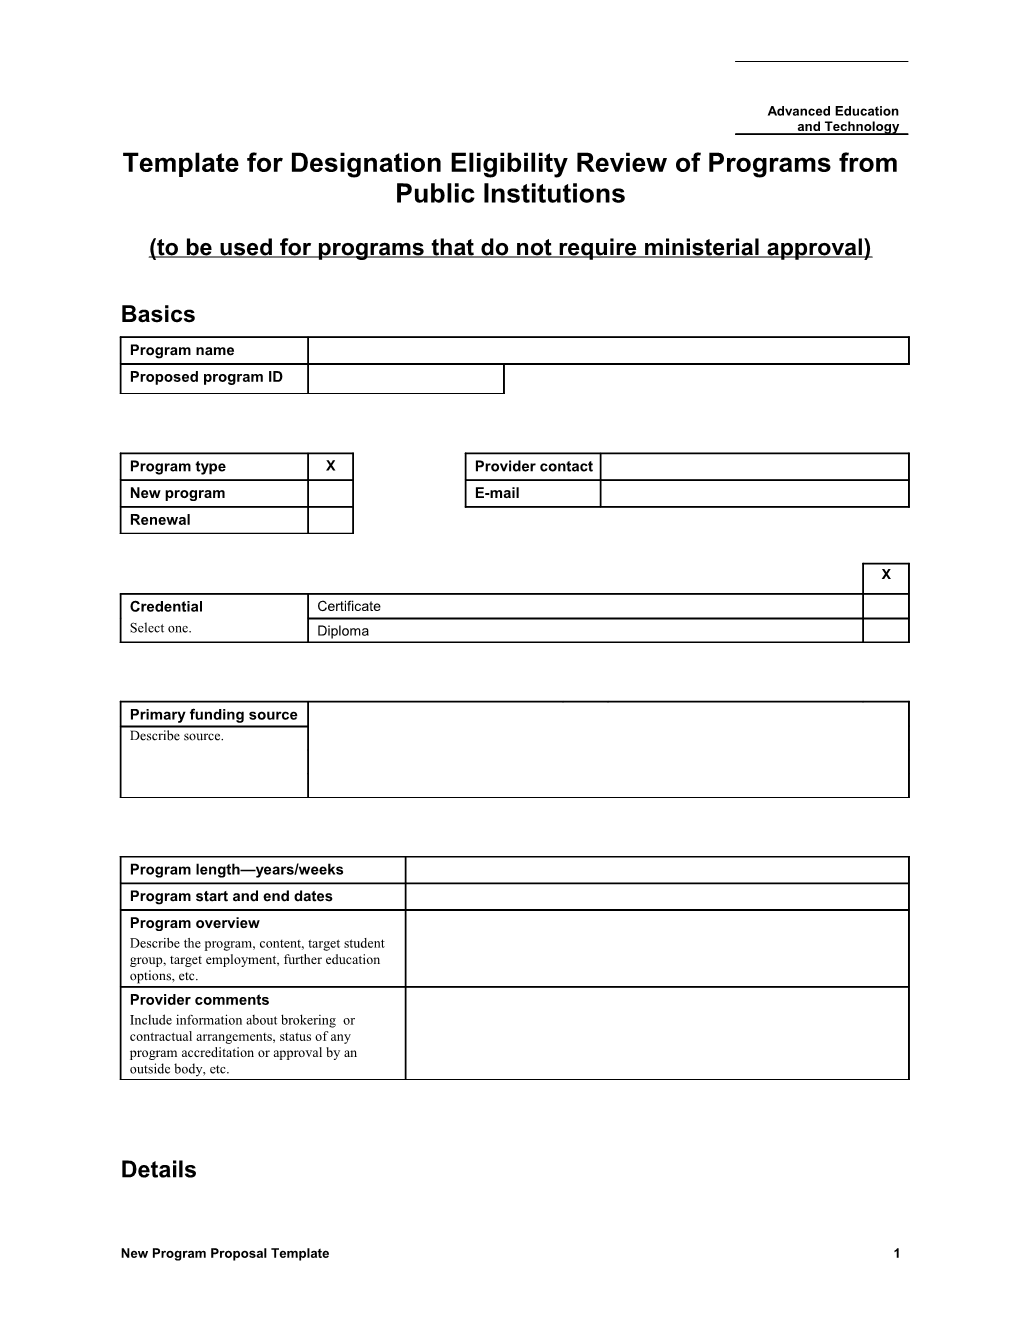 Template for Designation Eligibility Review of Programs from Public Institutions